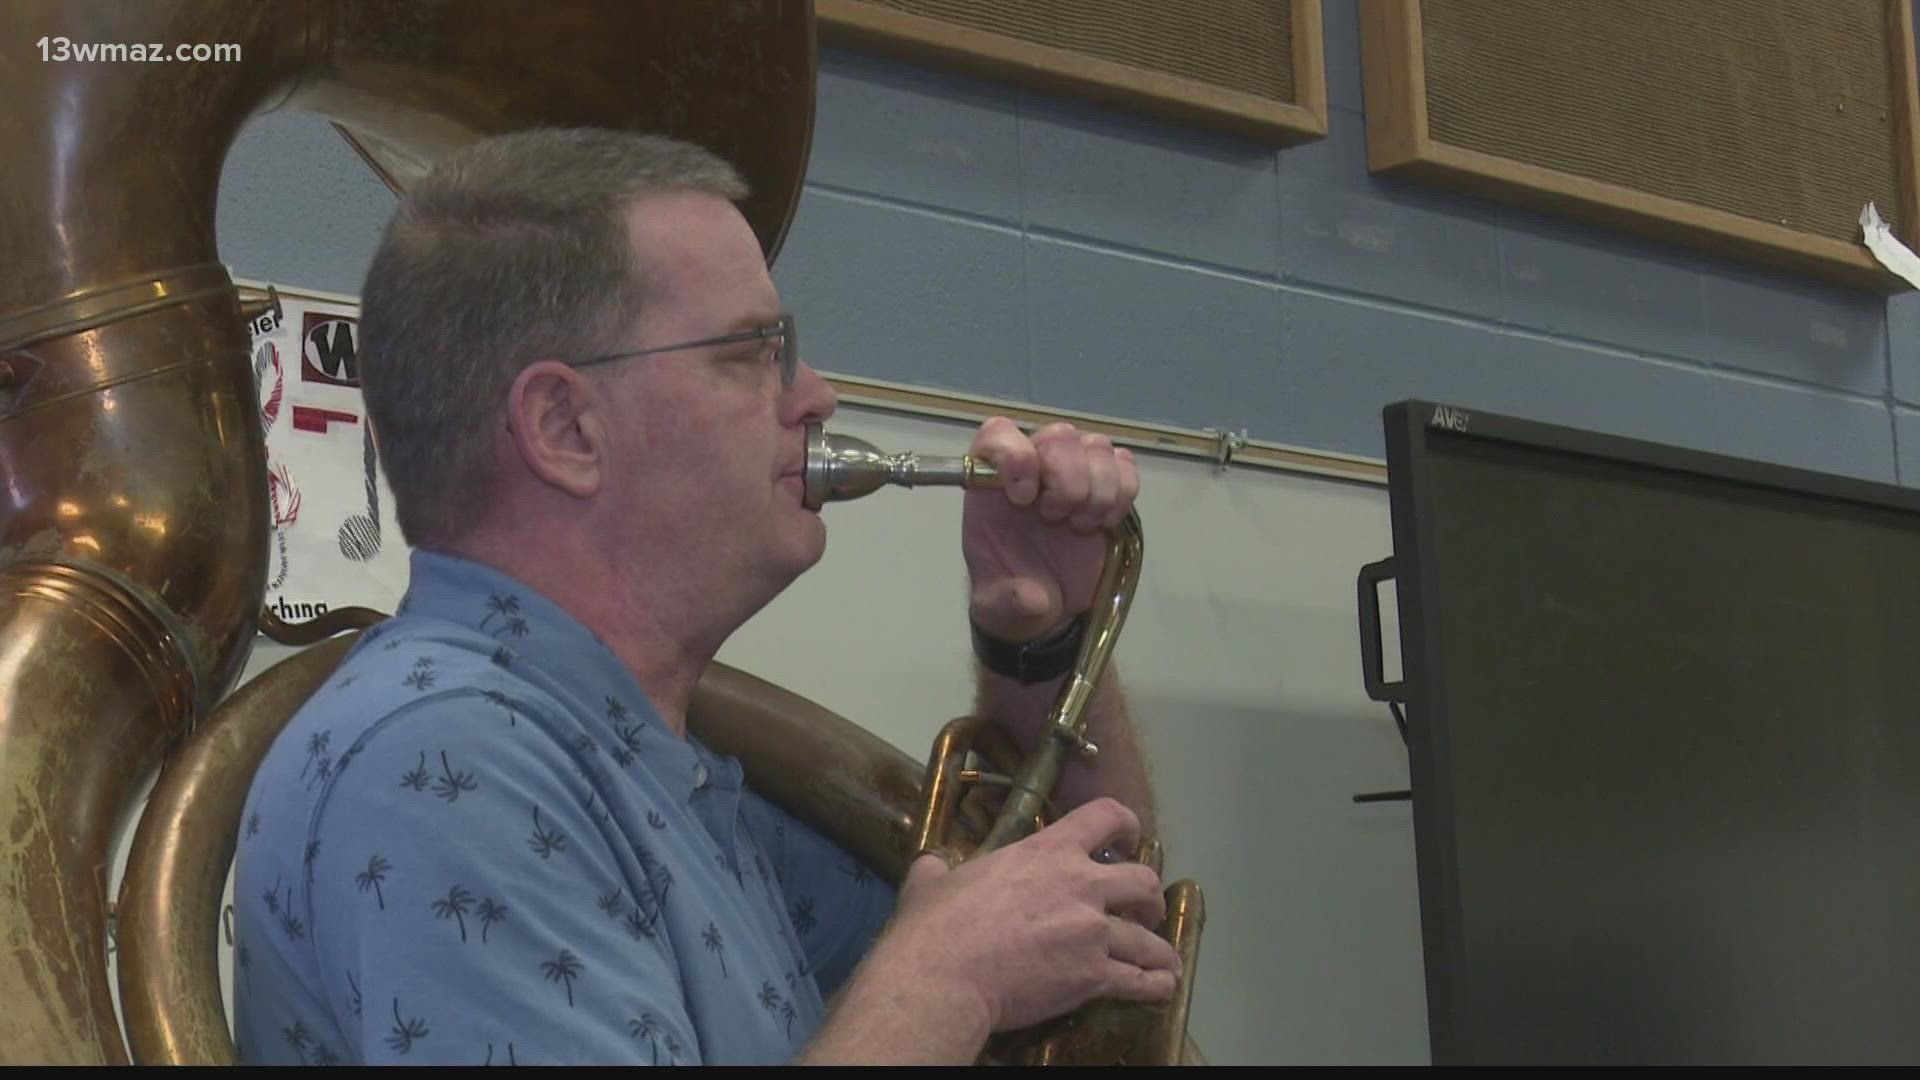 Band students at Wheeler County High School say they want to celebrate their band director, who is turning his students into musical geniuses.